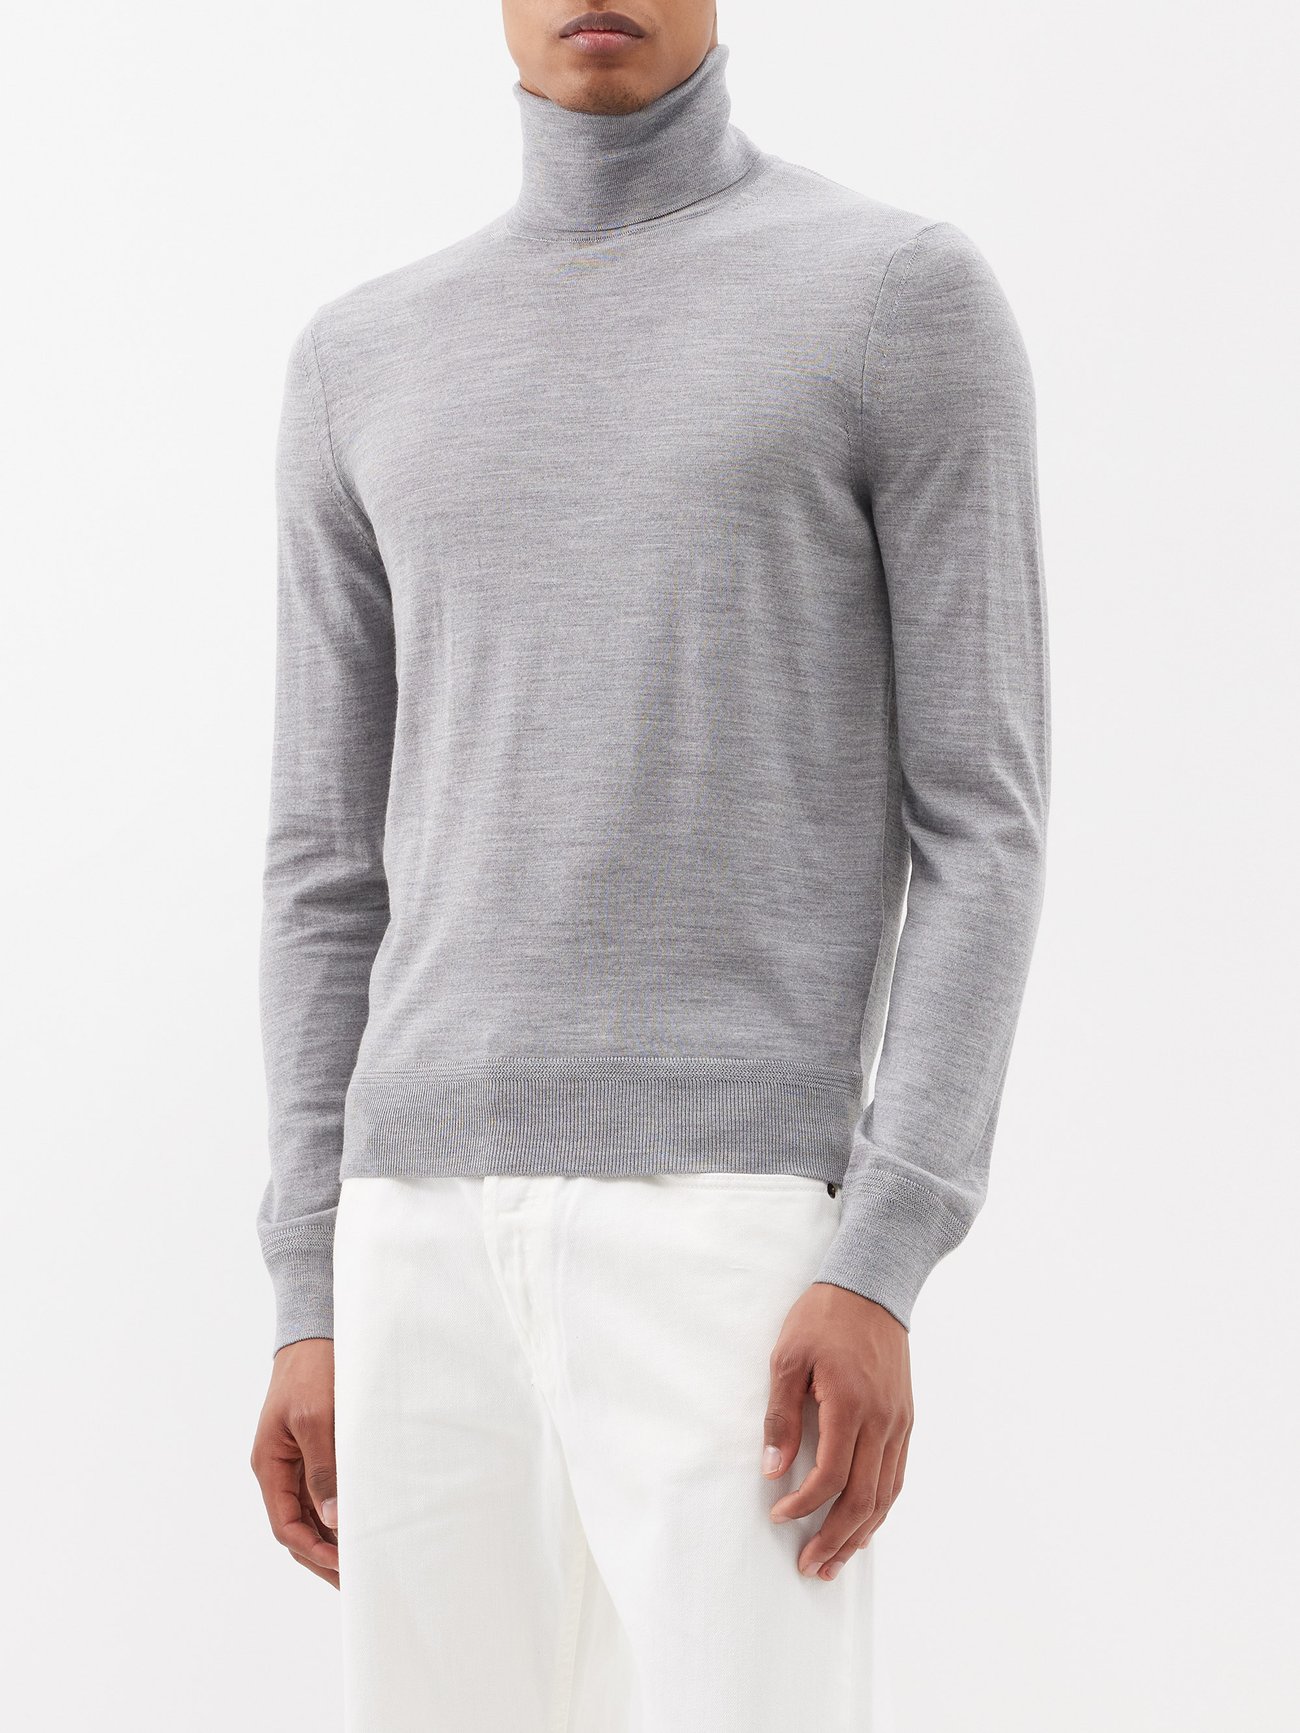 Grey Roll-neck wool sweater | Tom Ford | MATCHES UK